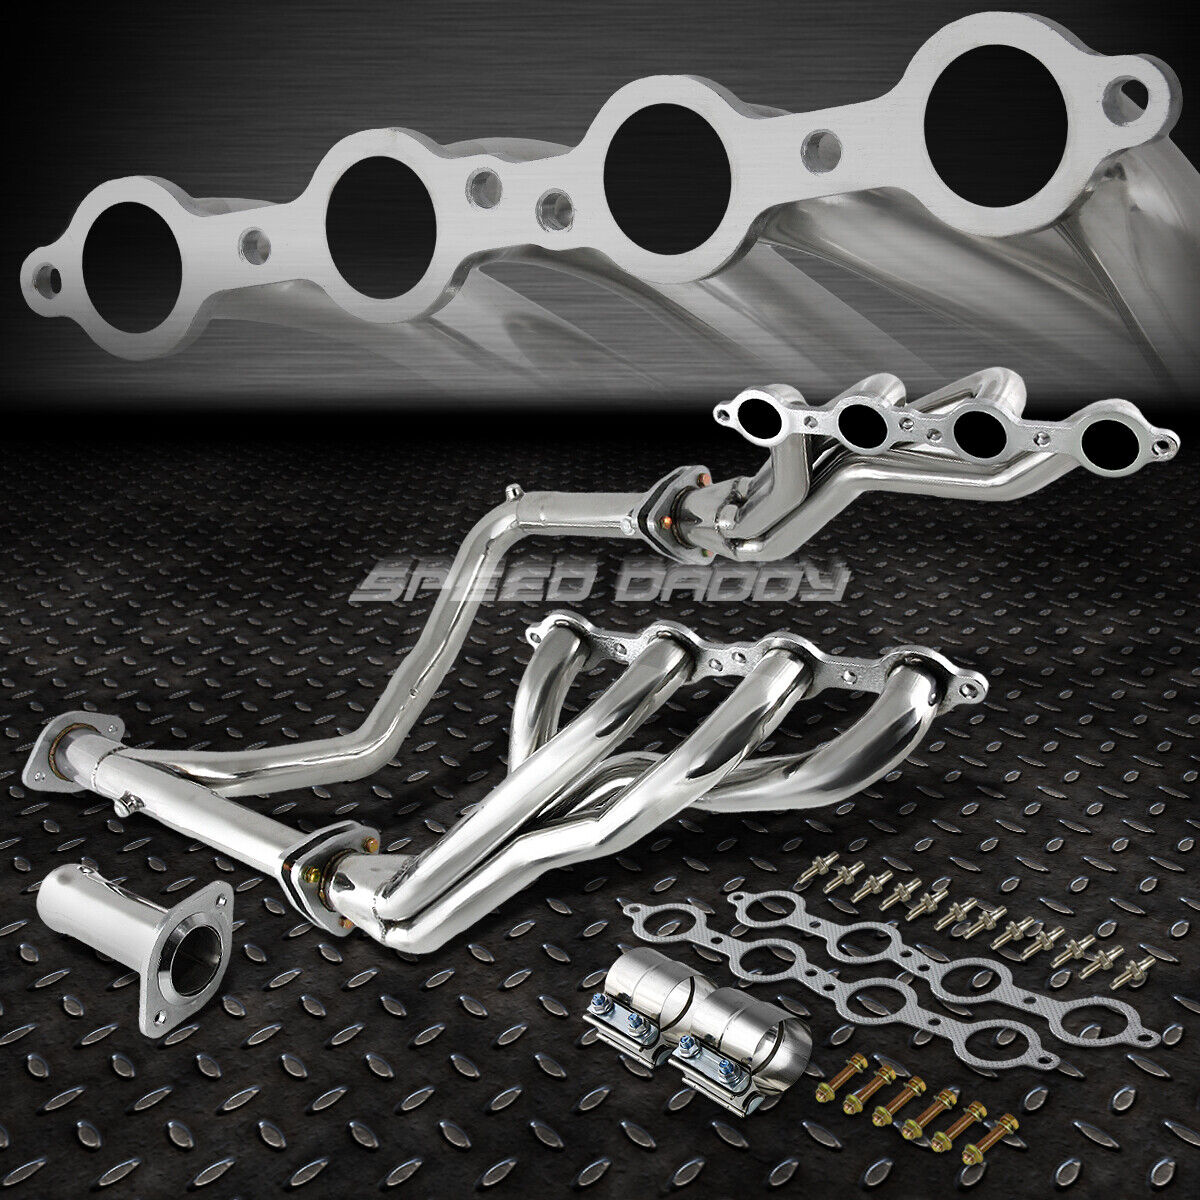 FOR 06-14 CHEVY GMC GMT900 4.8/5.3/6.0L LONG TUBE HEADER EXHAUST MANIFOLD+Y-PIPE